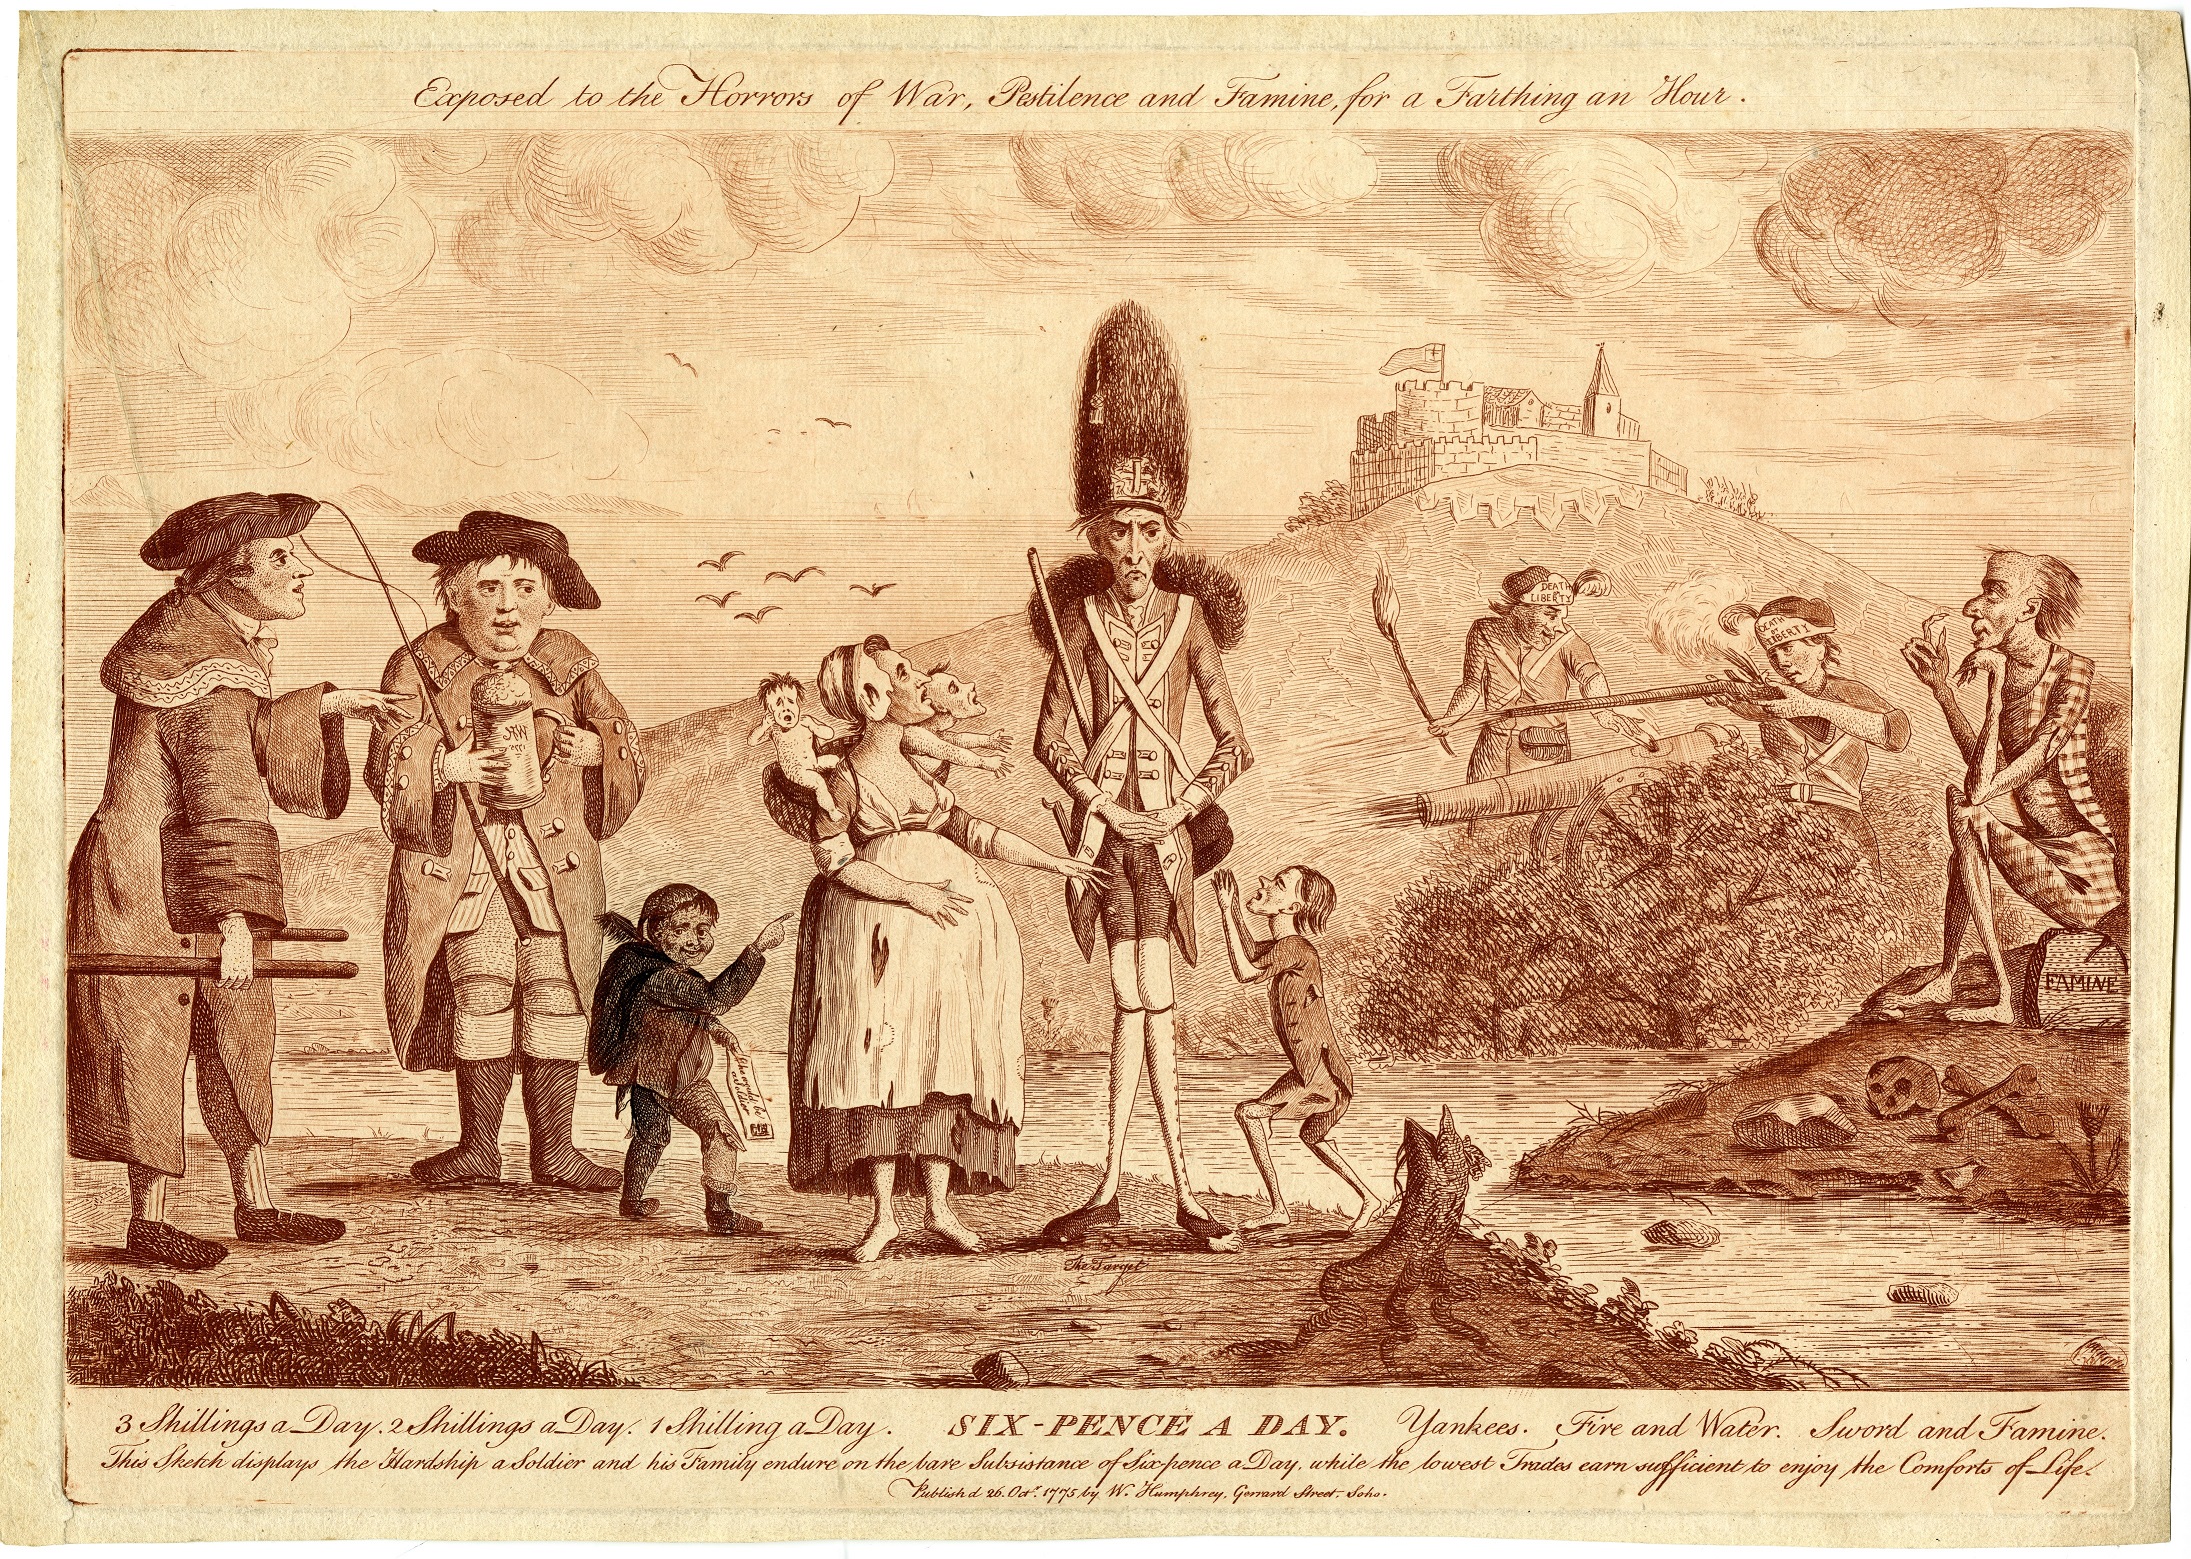 The satirical engraving depicting the plight of British soldiers is one of ten great Revolutionary War prints.